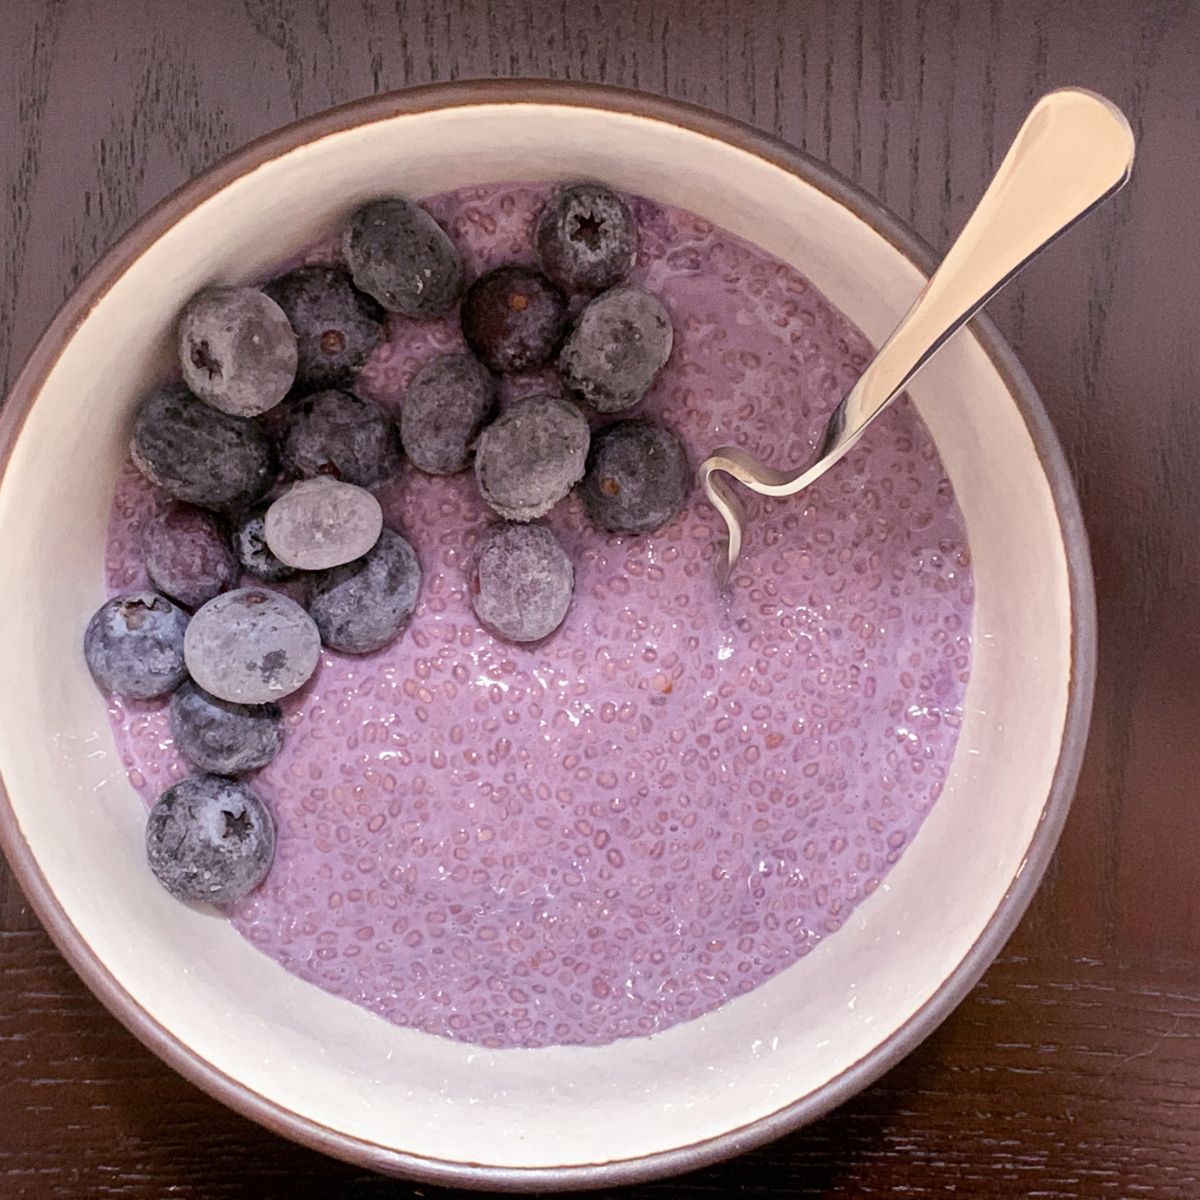 Purple sweet potato chia pudding served with fresh blueberries.